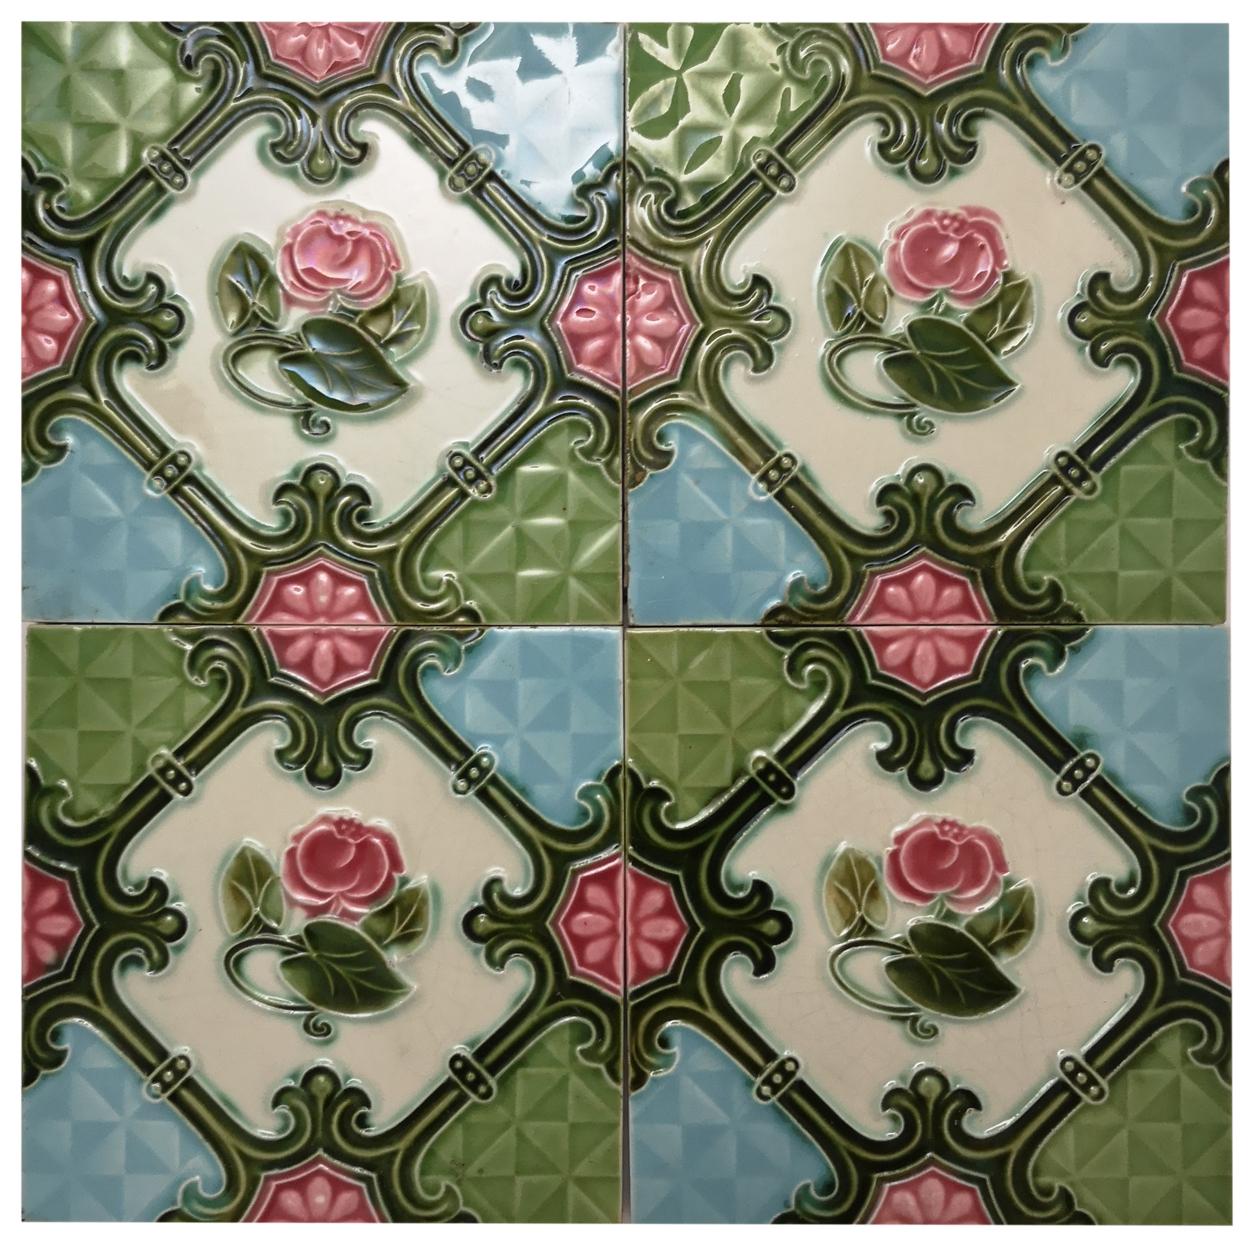 This is an amazing set of antique Art Nouveau handmade tiles S.A. Produits Ceramiques de la Dyle. 1930s. 
A beautiful relief and deep rich rose deep green, and creme color. These tiles would be charming displayed on easels, framed or incorporated